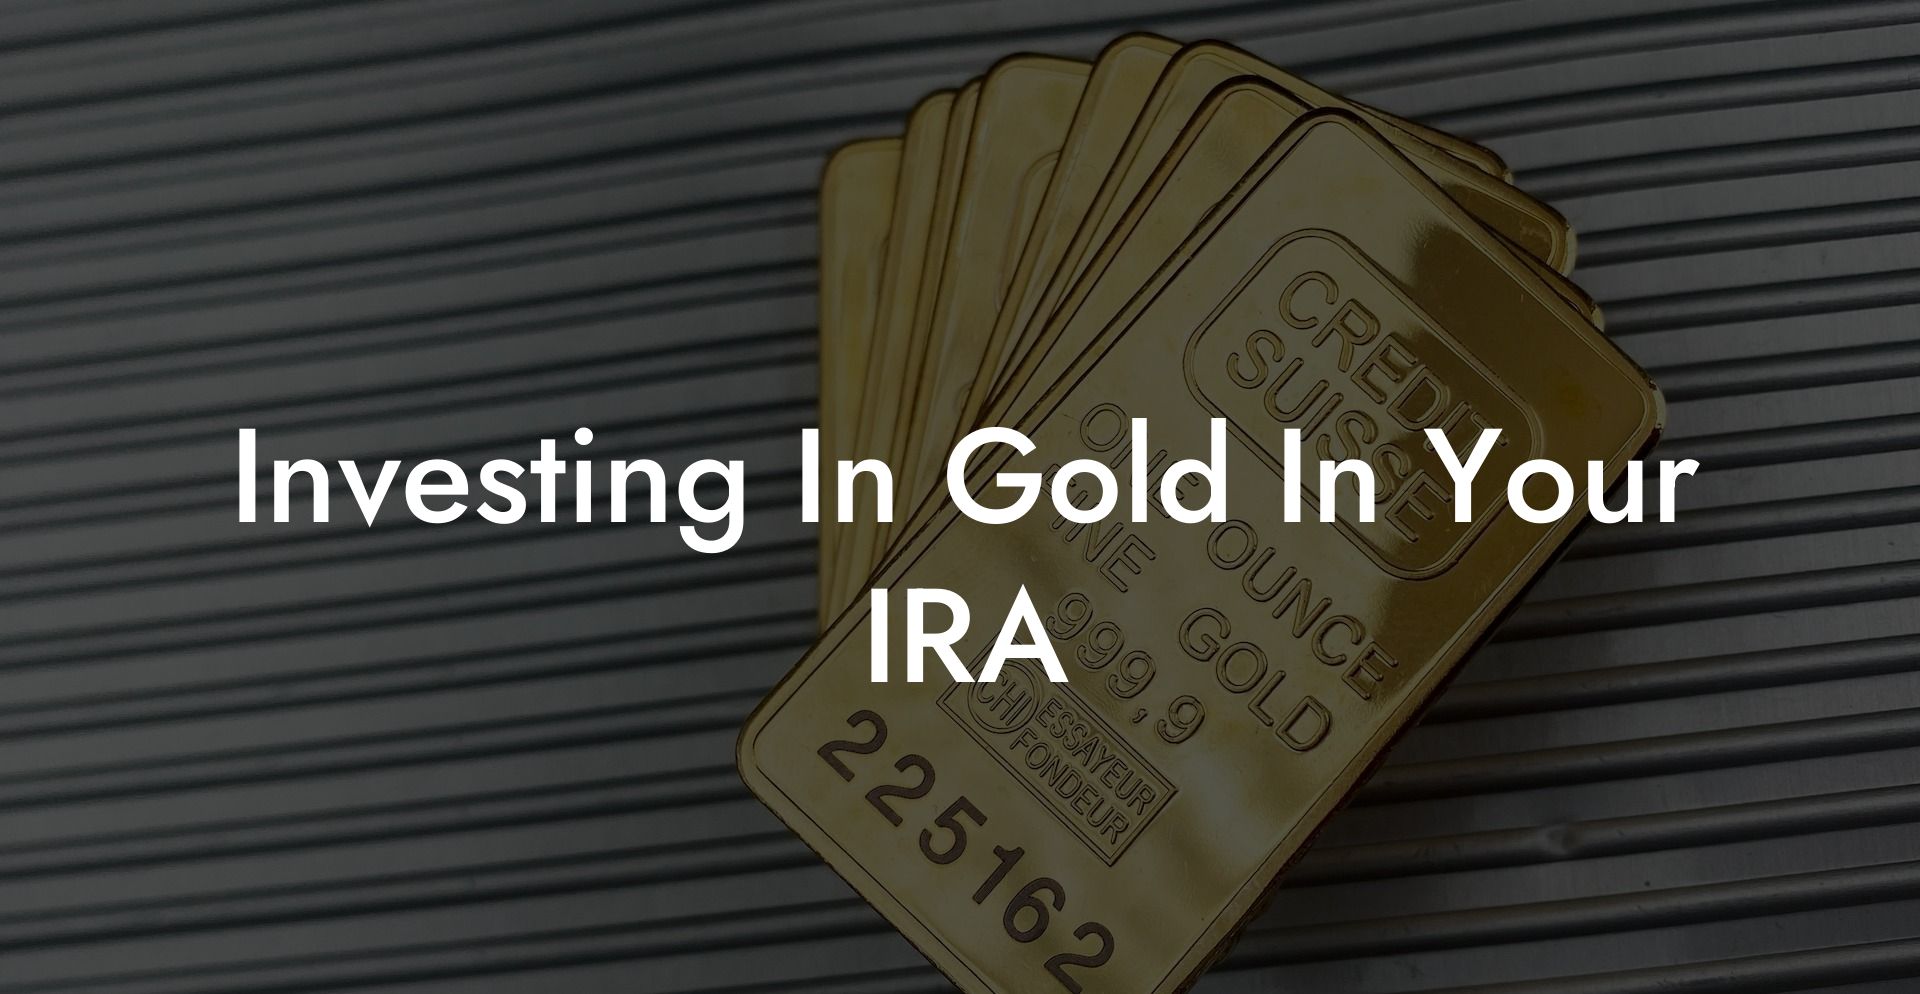 Investing In Gold In Your IRA